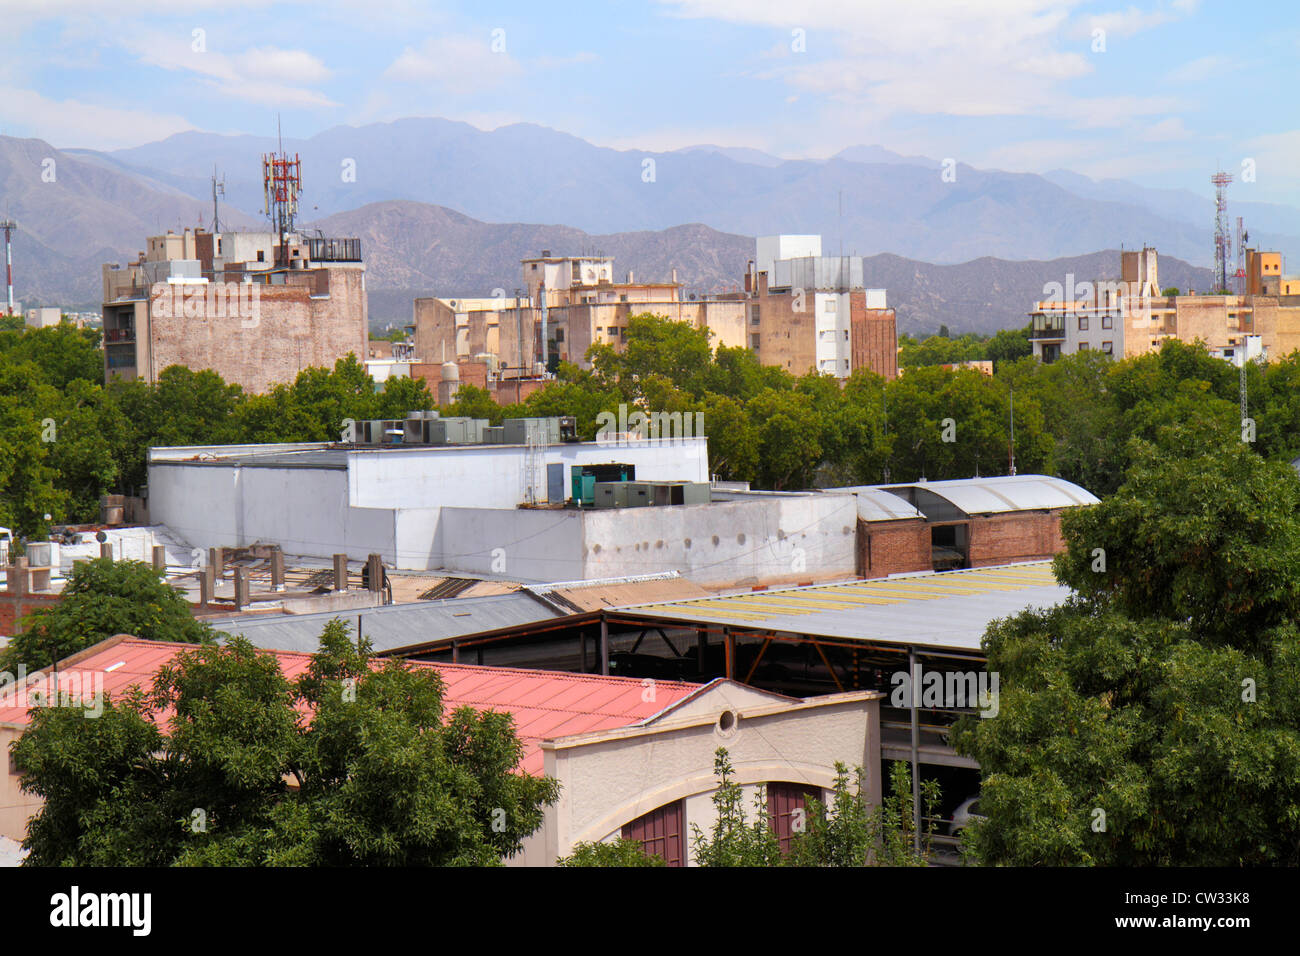 Mendoza Argentina,view from Avenida San Juan hotel,hotels,Andes Mountains,South America mountain range,skyline,building,warehouse,trees,antenna,roof,r Stock Photo